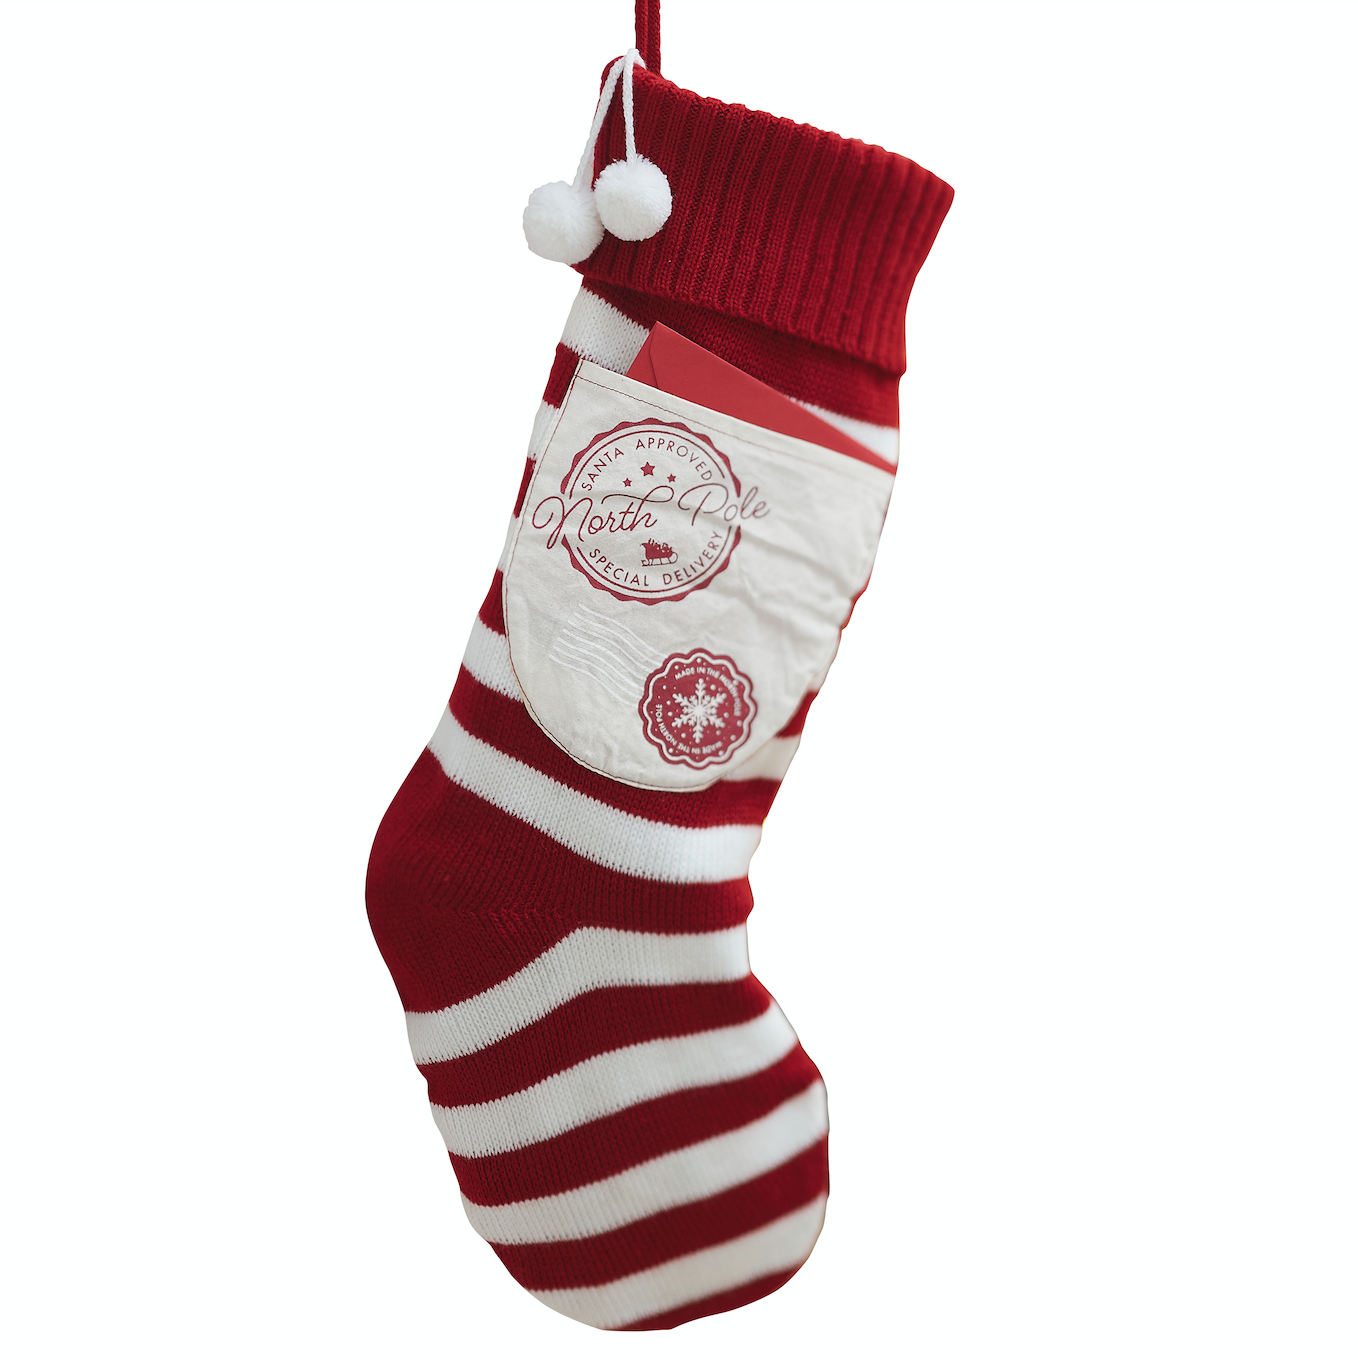 Red and White Knitted Christmas Stocking with Pocket